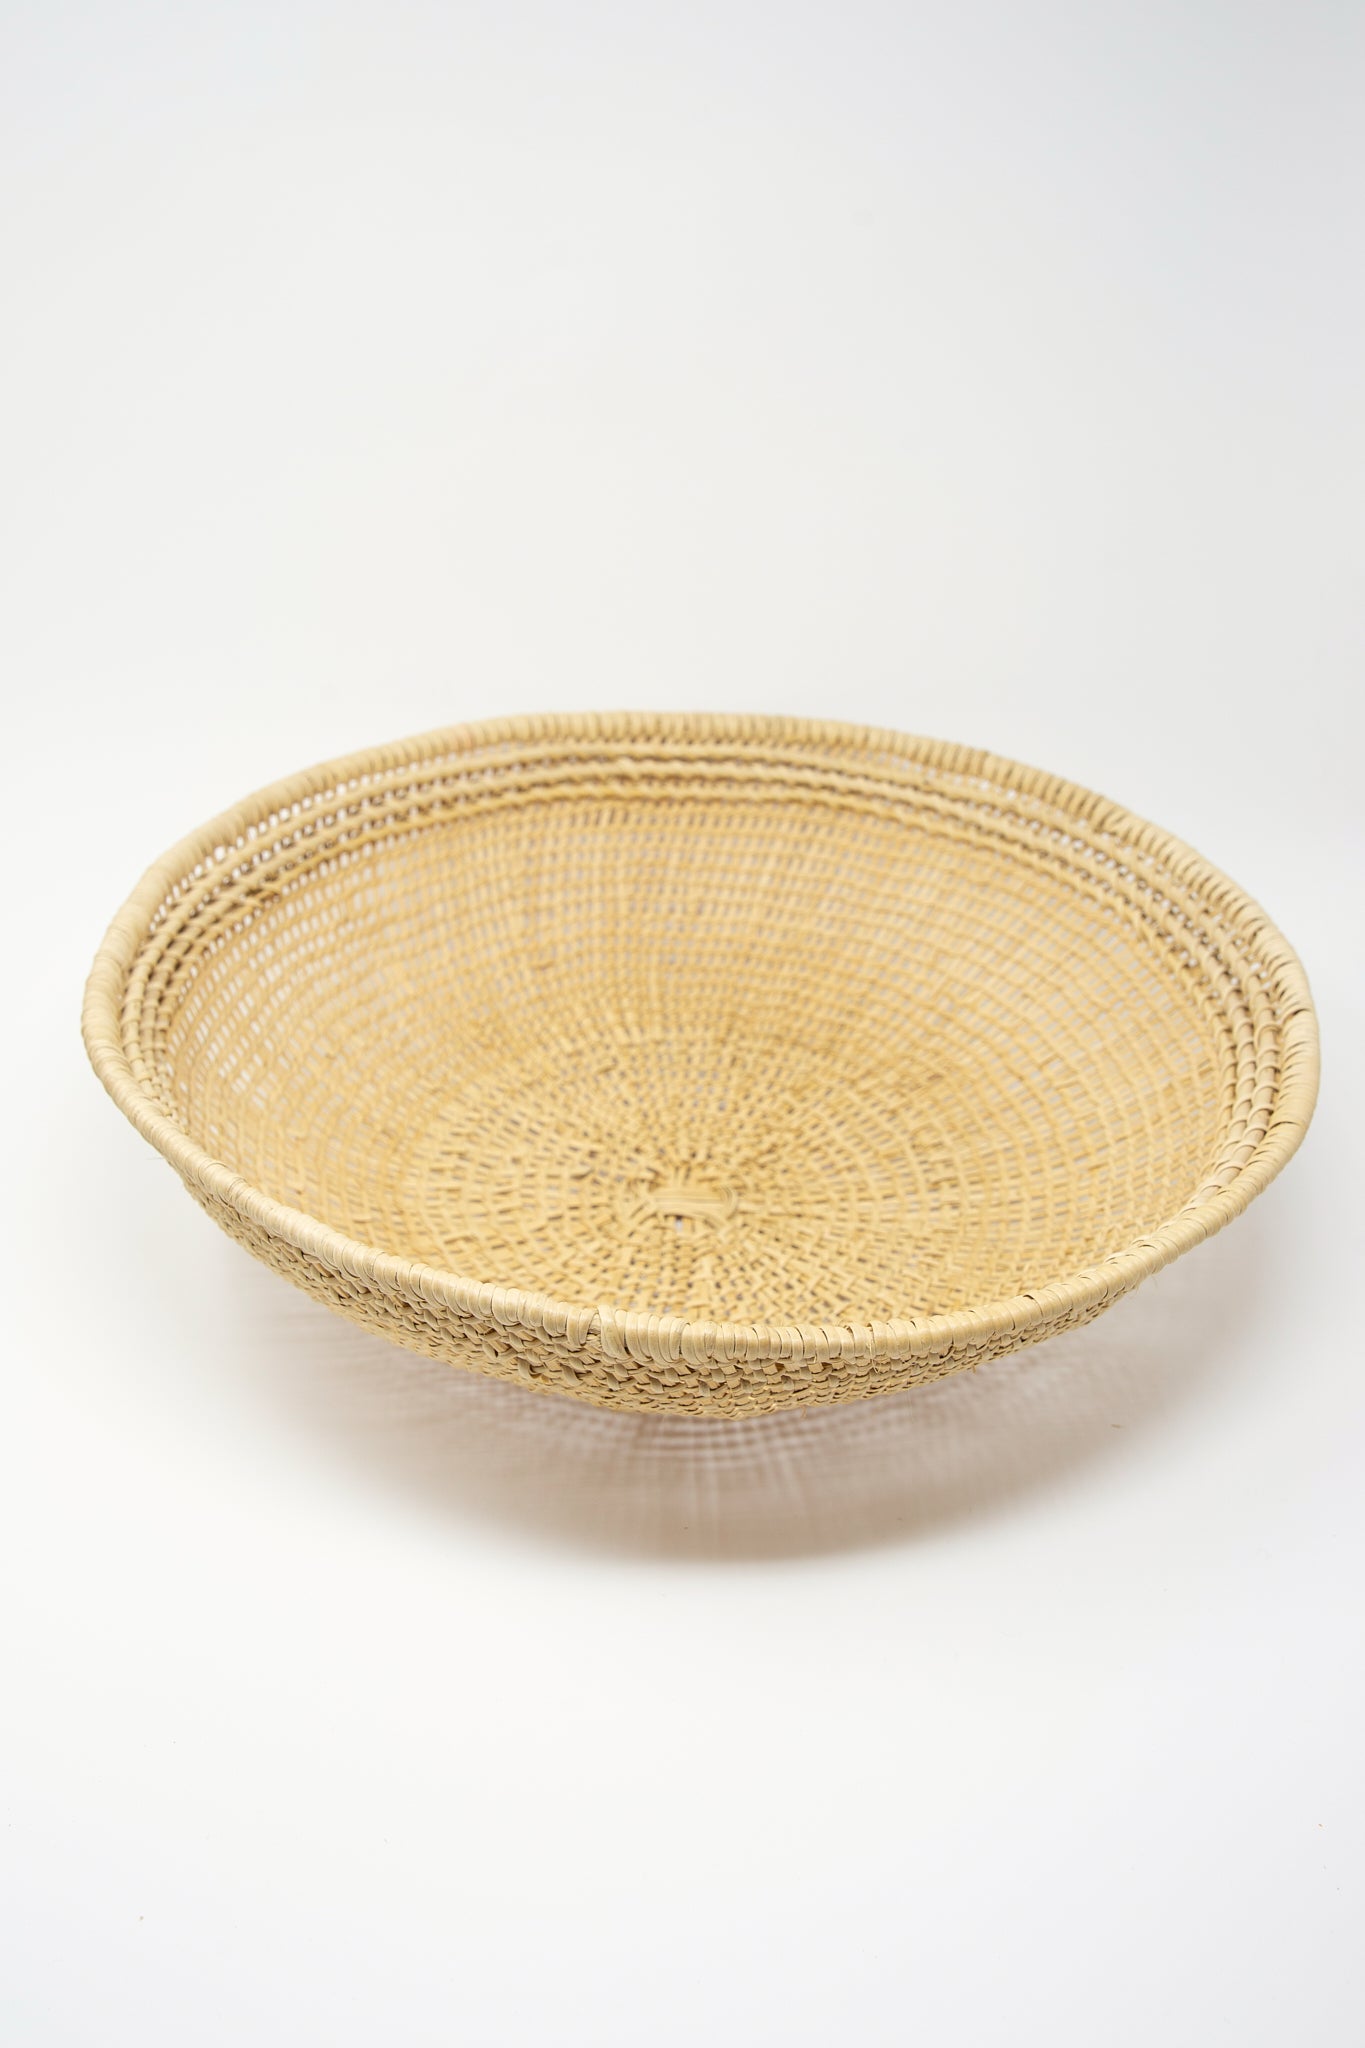 An artisan-crafted Large Avia Pova Basket woven with intricate weaving techniques, displayed on a clean white background. (Brand: Plaza Bolivar)